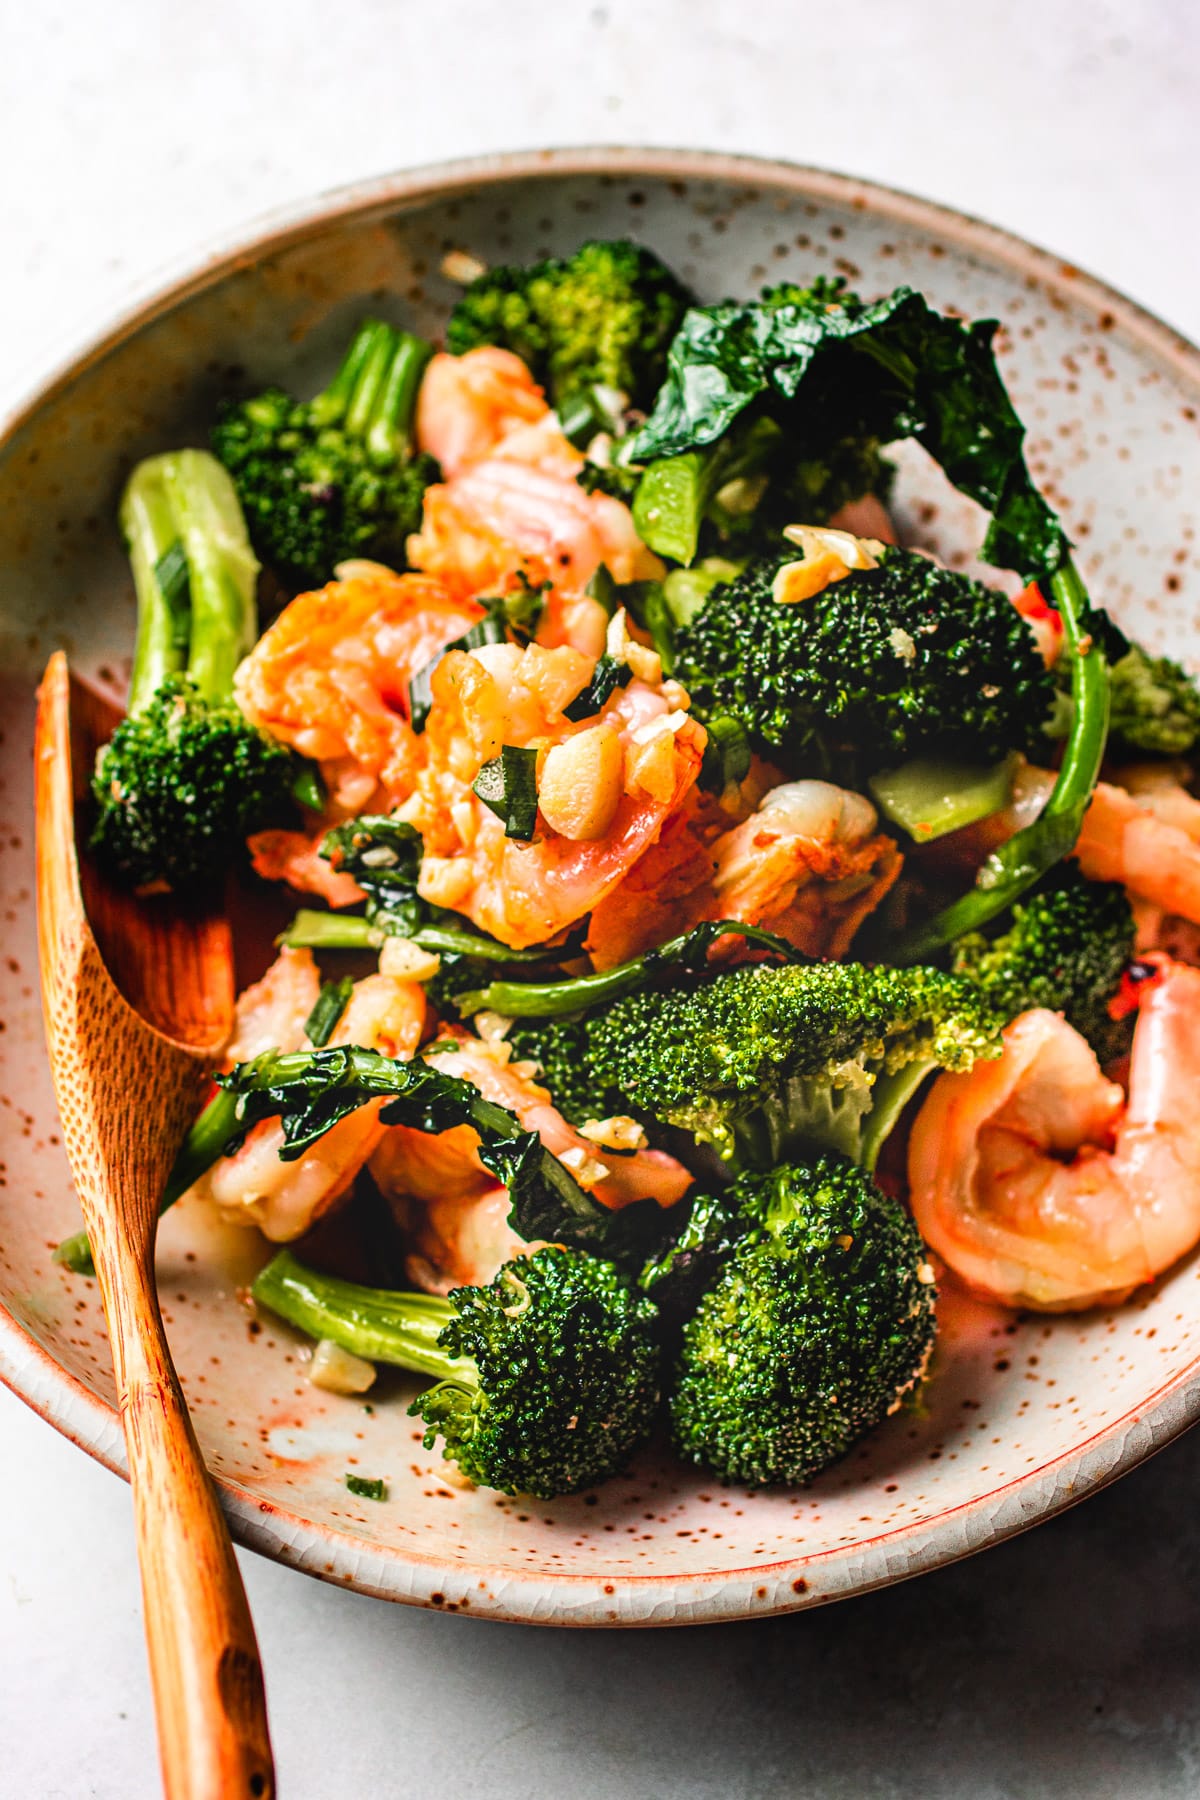 Image shows Chinese shrimp and broccoli stir fry dish served on a plate.